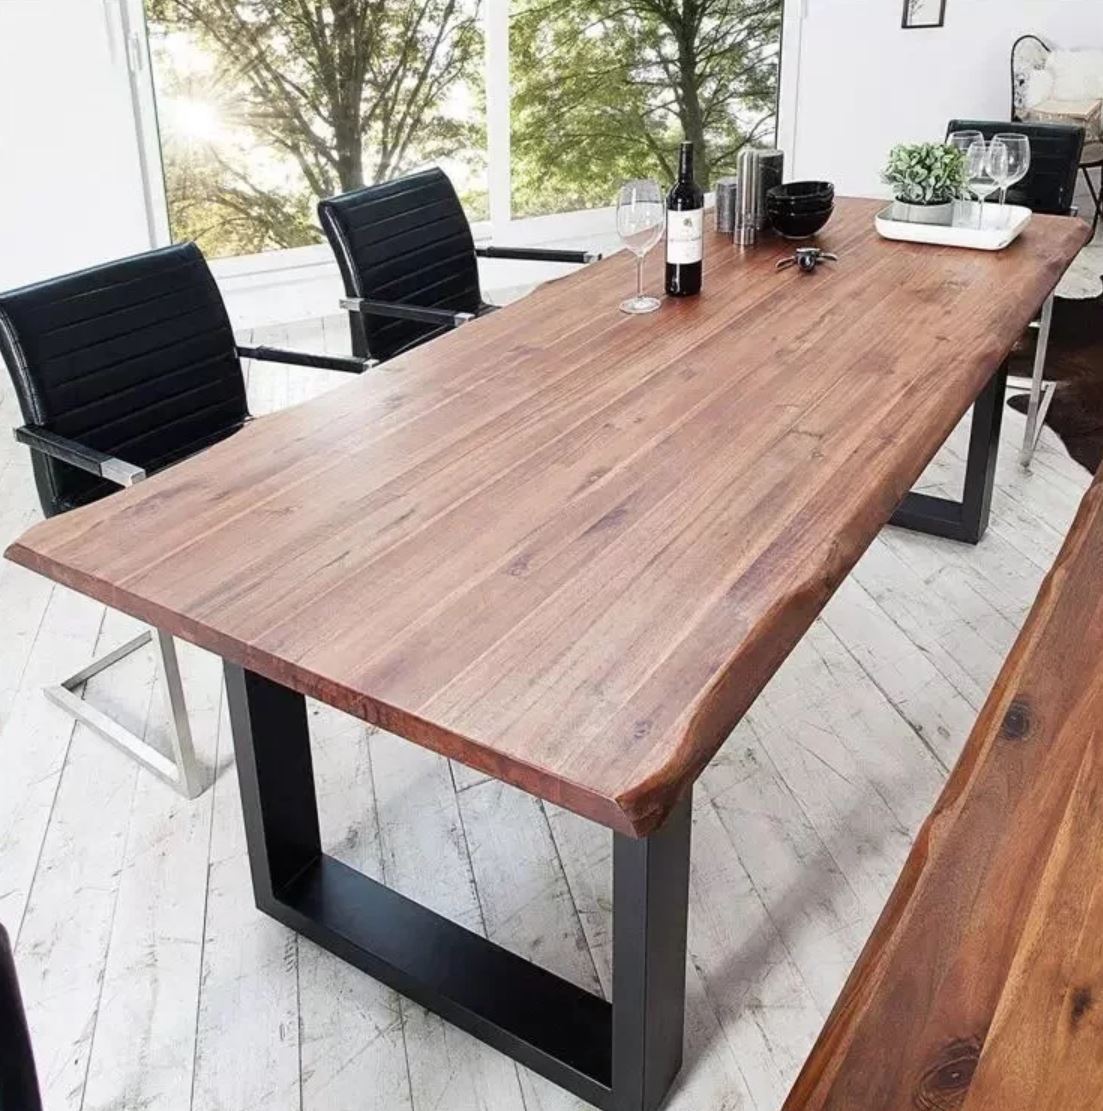 AUBREY Modern Industrial Solid Wood Dining Table  ( 4 Color Selection ) Special Price $499 - 899